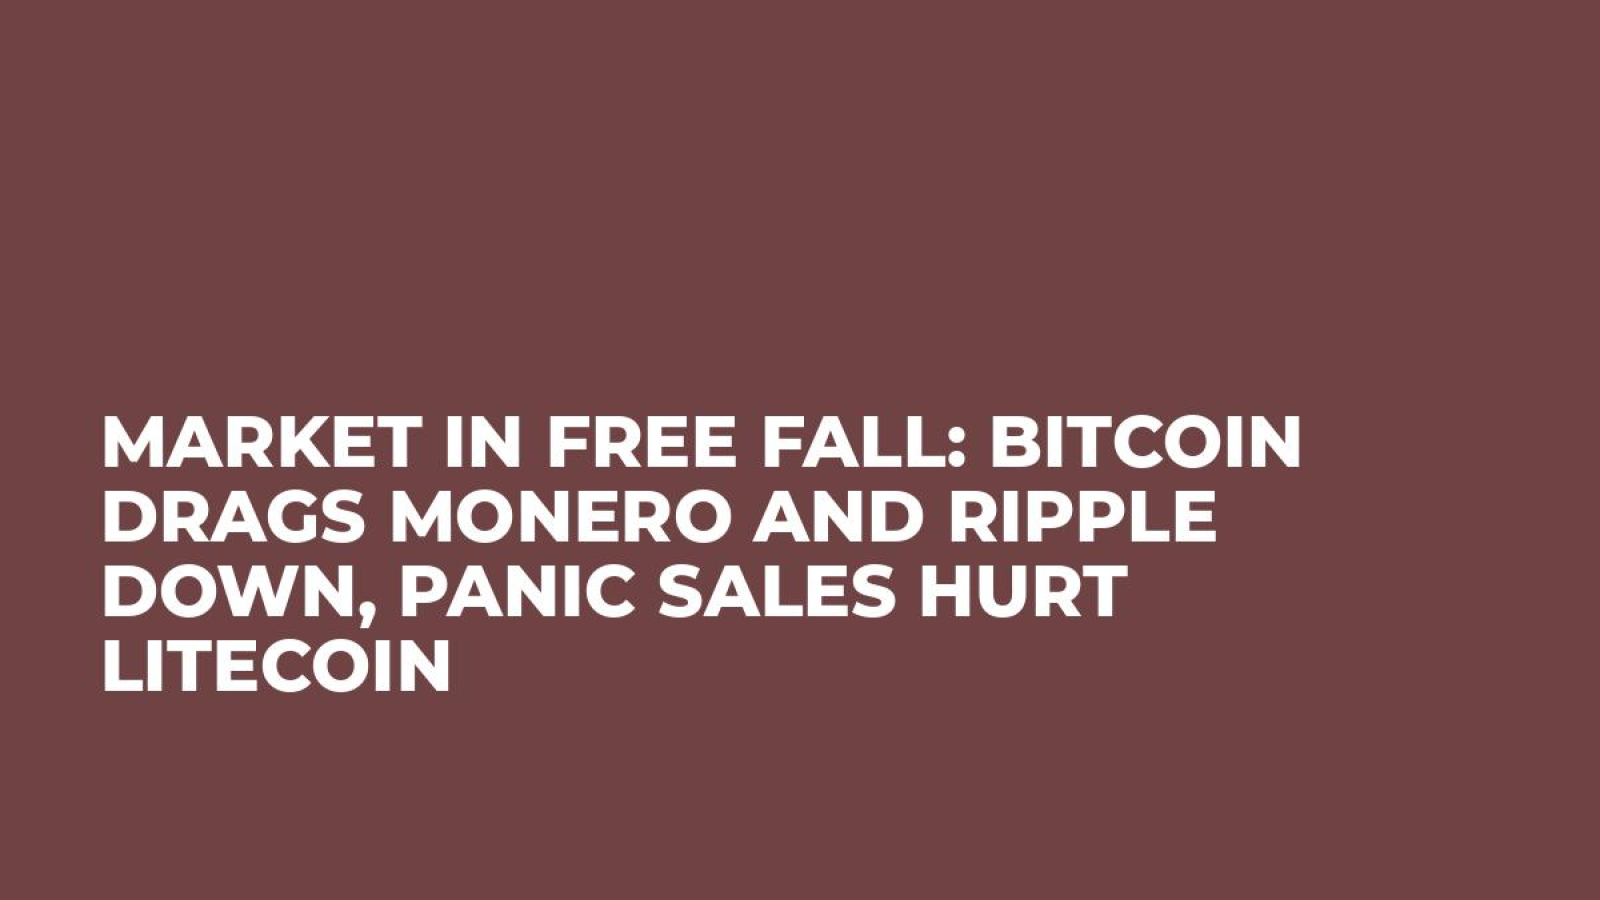 Market in Free Fall: Bitcoin Drags Monero and Ripple Down, Panic Sales Hurt Litecoin